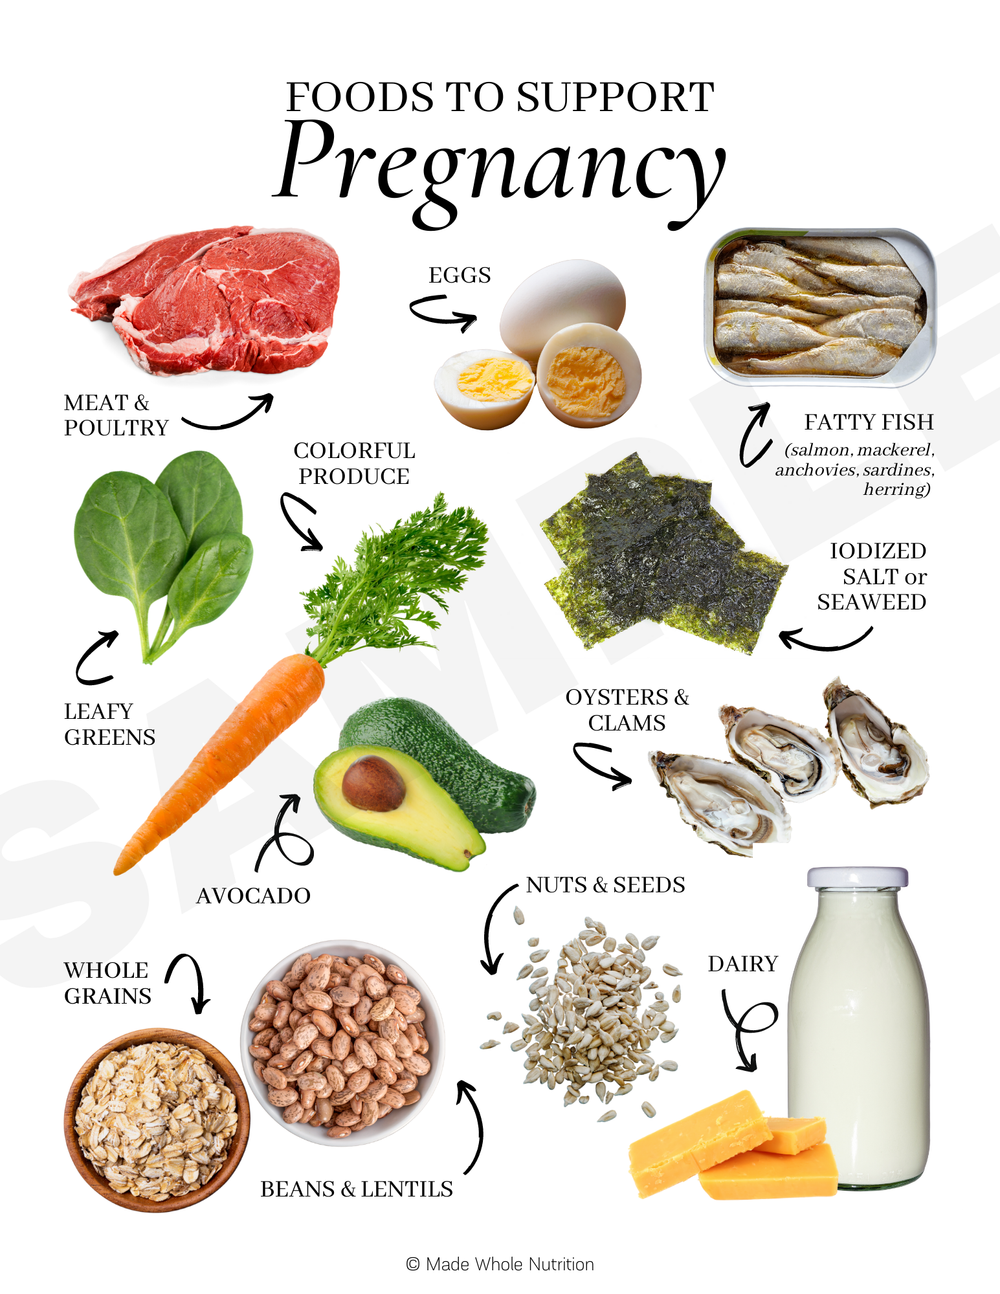 Foods to Support Pregnancy